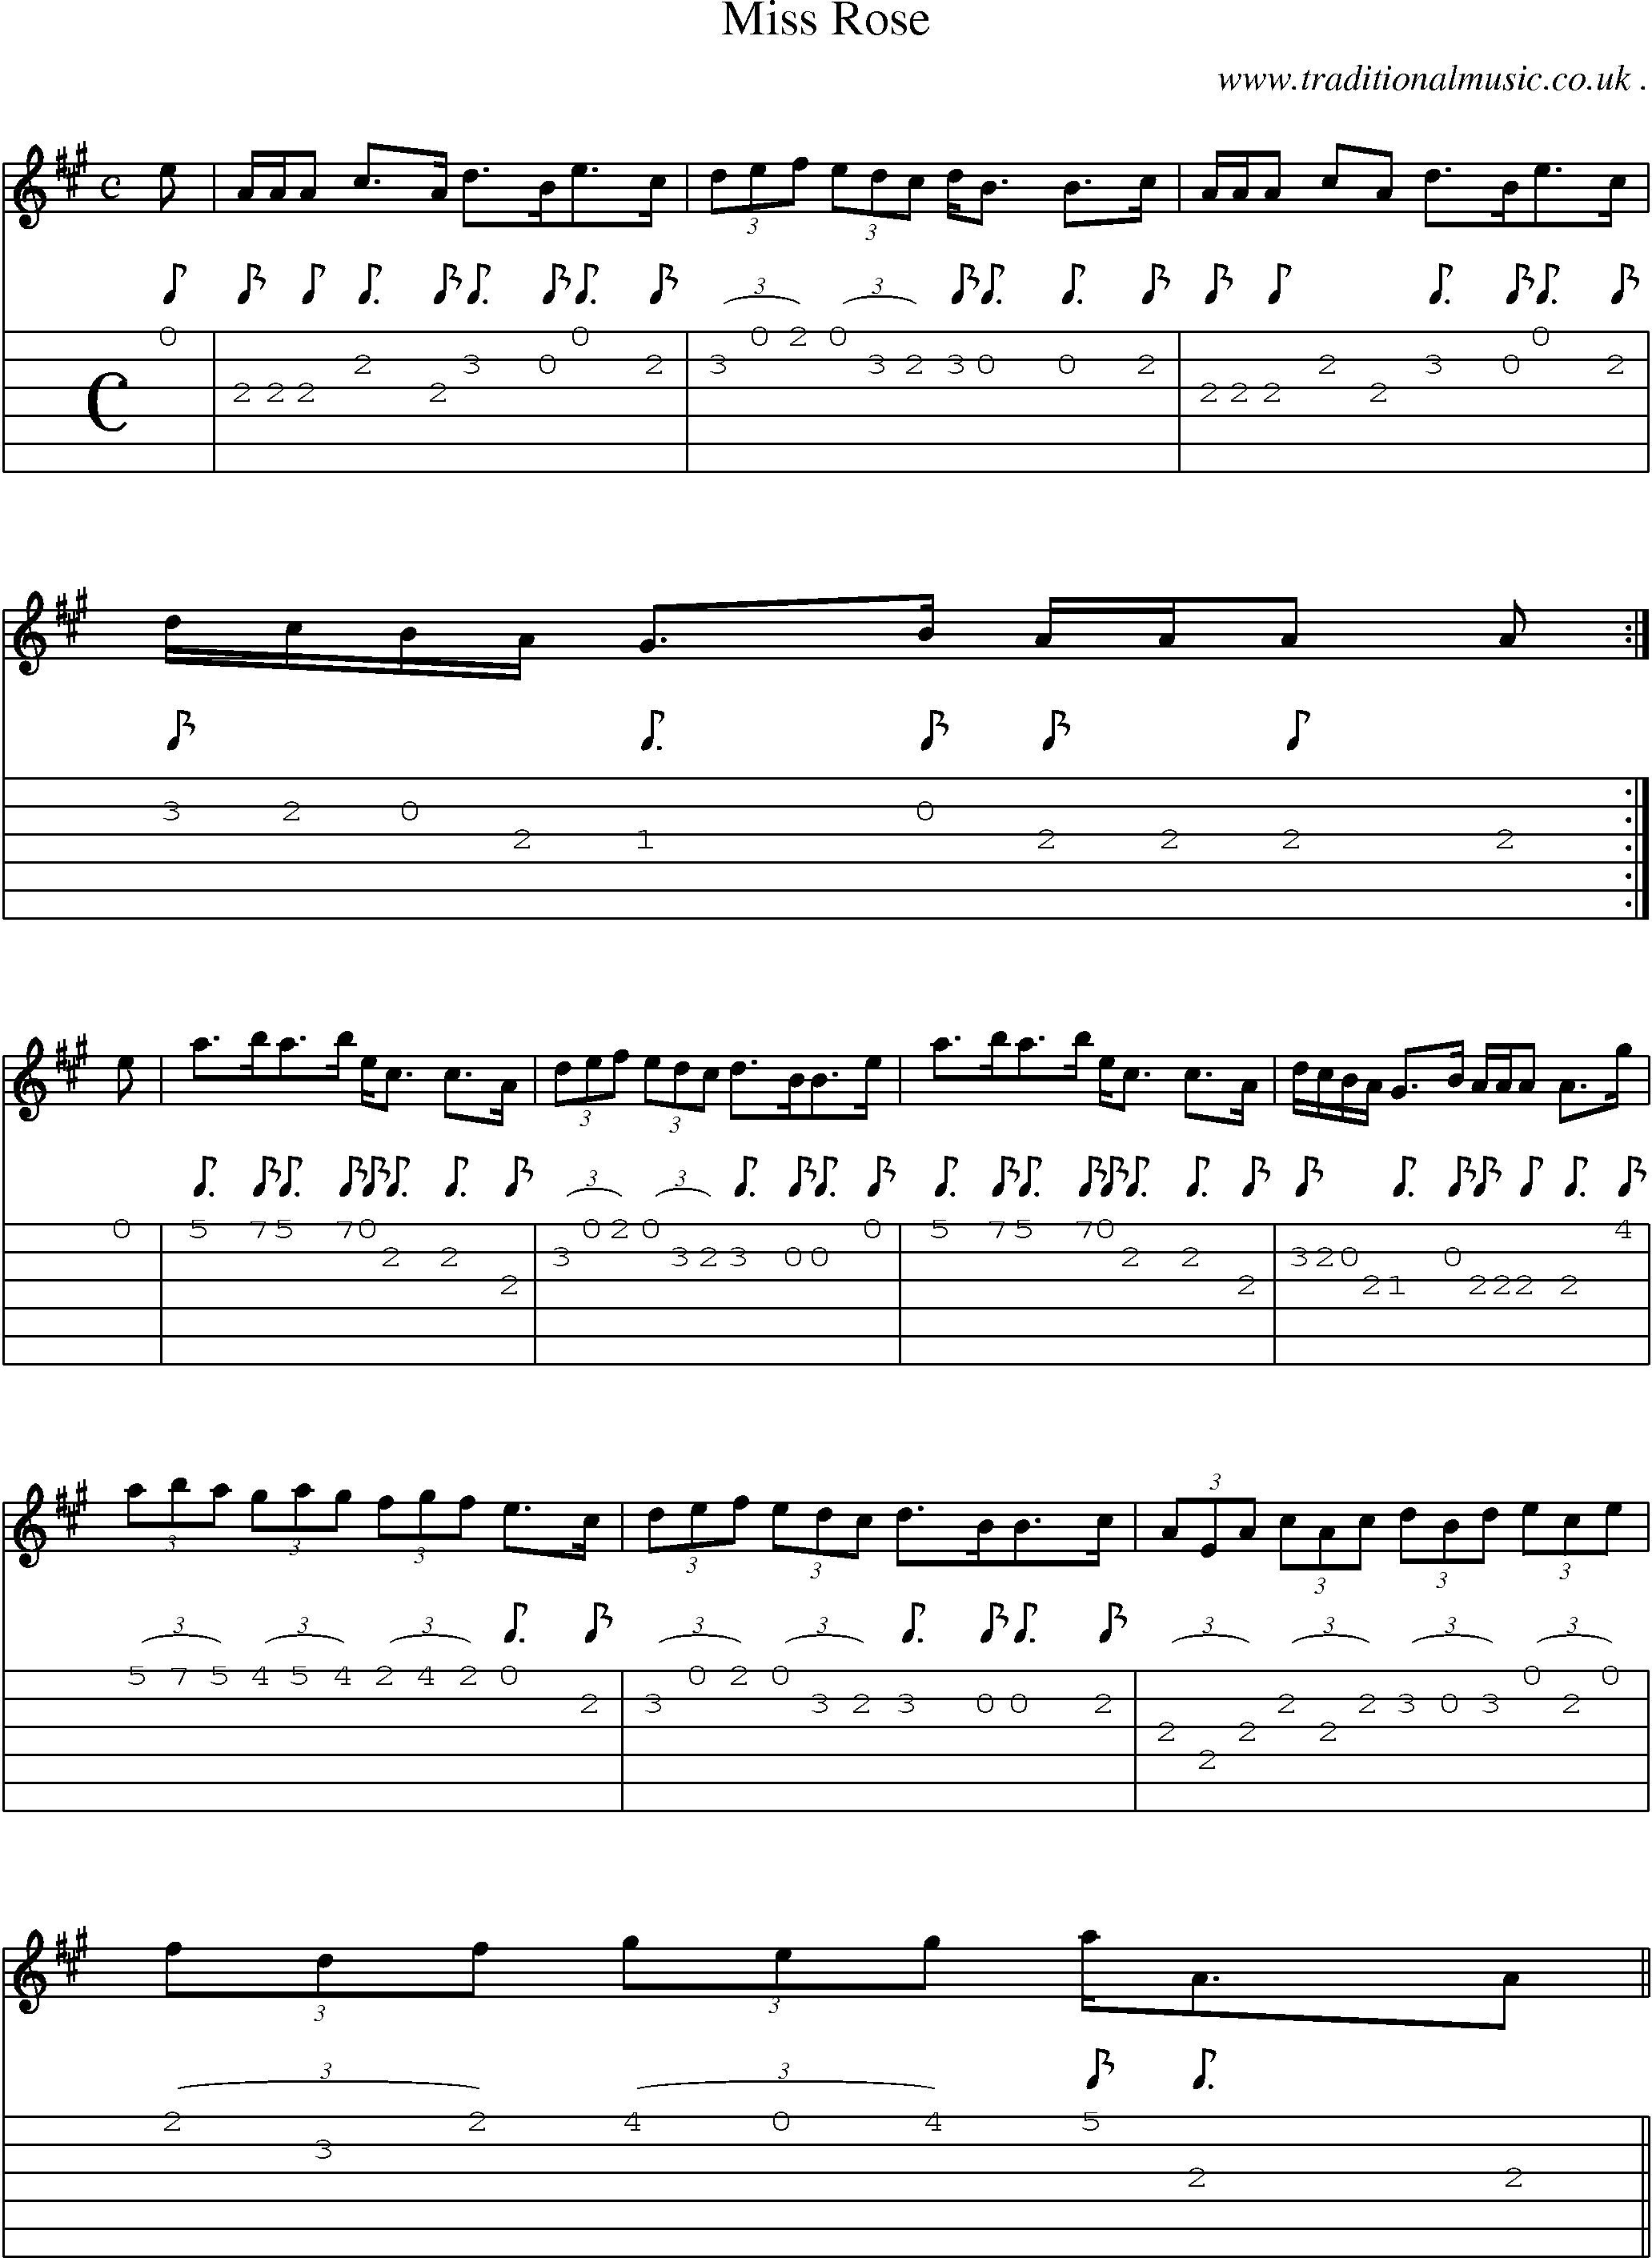 Sheet-music  score, Chords and Guitar Tabs for Miss Rose